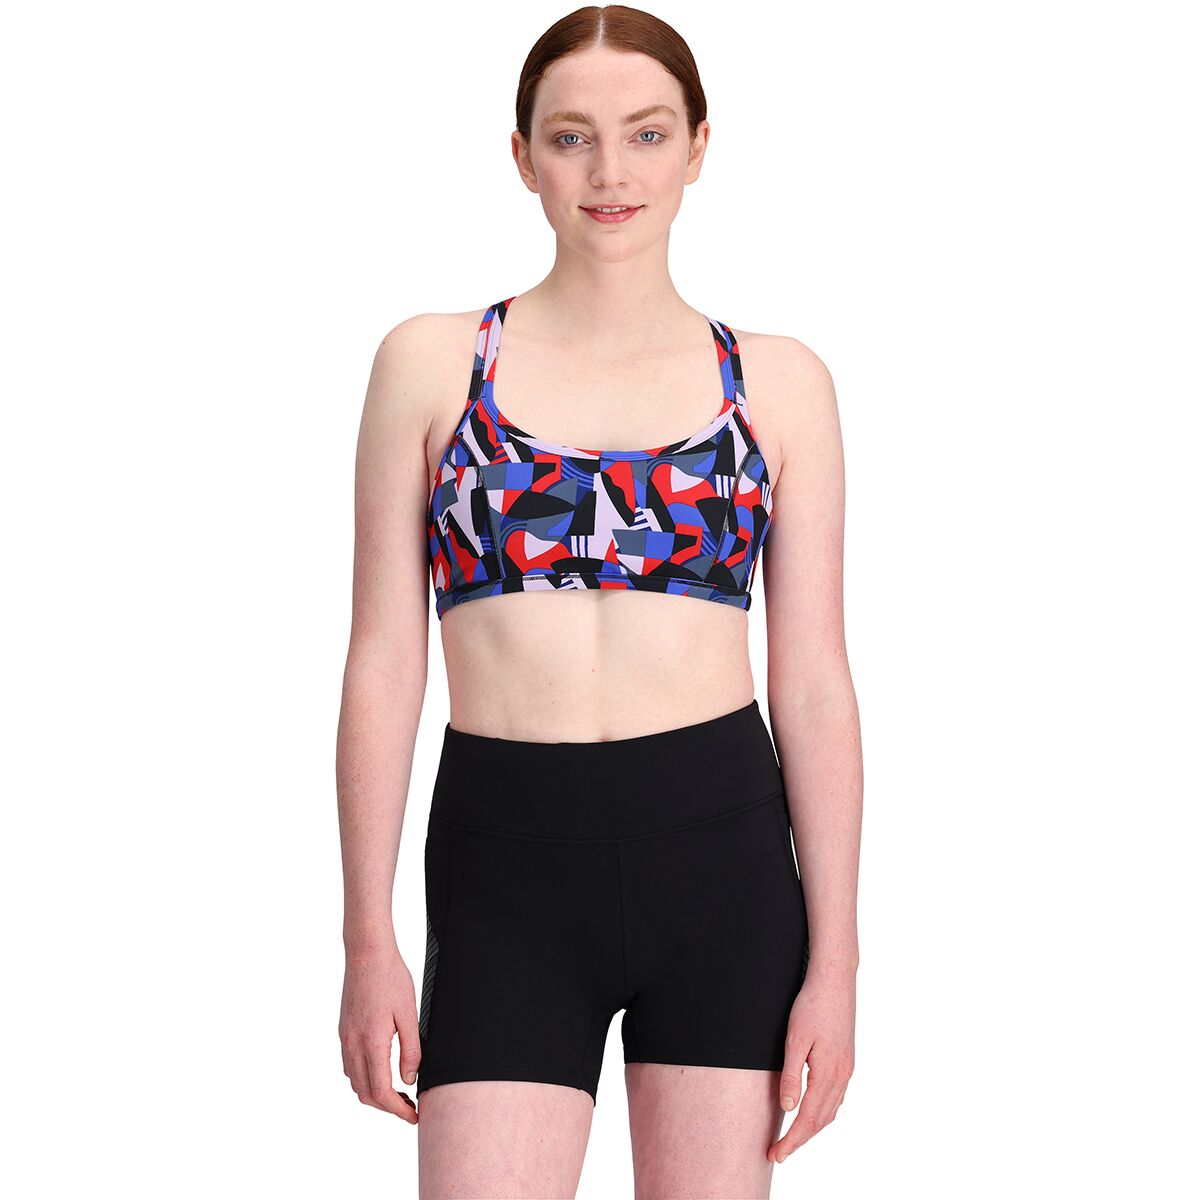 Outdoor Research Vantage Printed Bralette - Light Support - Women's